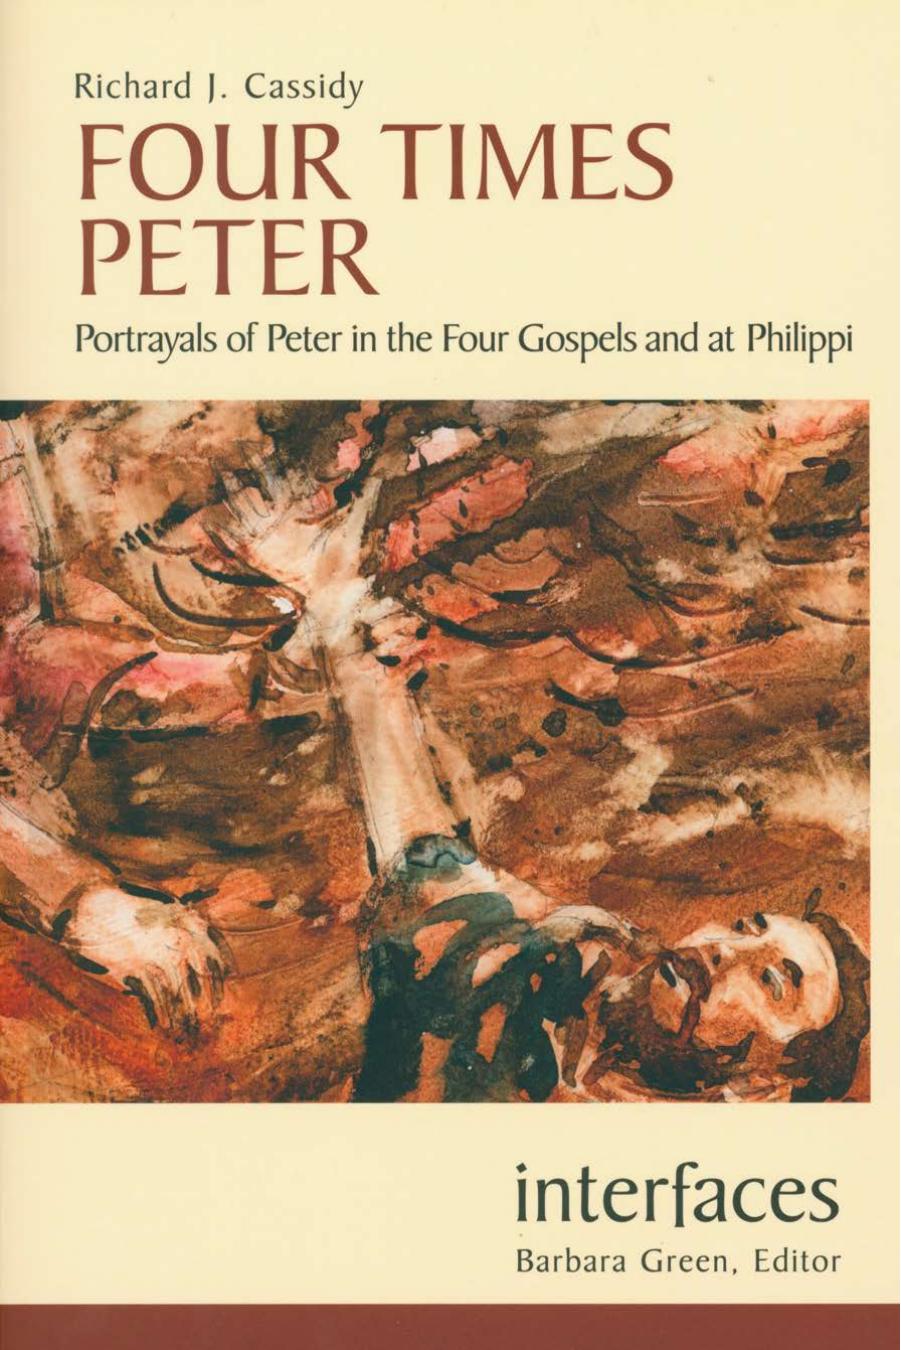 Four Times Peter: Portrayals of Peter in the Four Gospels and at Philippi by Richard J. Cassidy